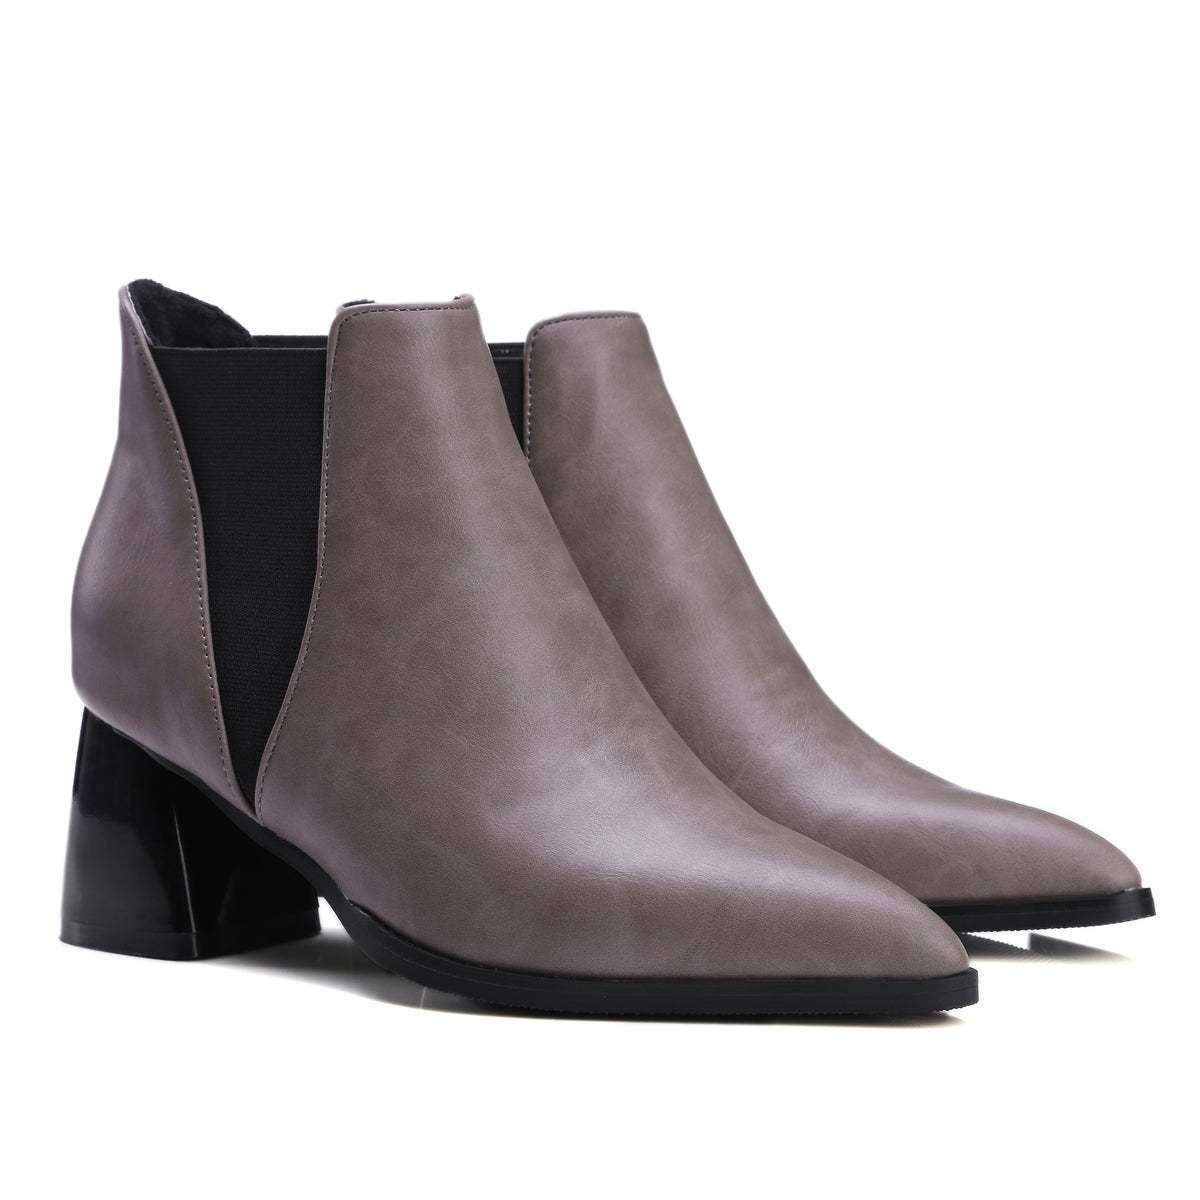 Bigsizeheels Mio magazine slip-on ankle boots with pointed toes - Gray freeshipping - bigsizeheel®-size5-size15 -All Plus Sizes Available!